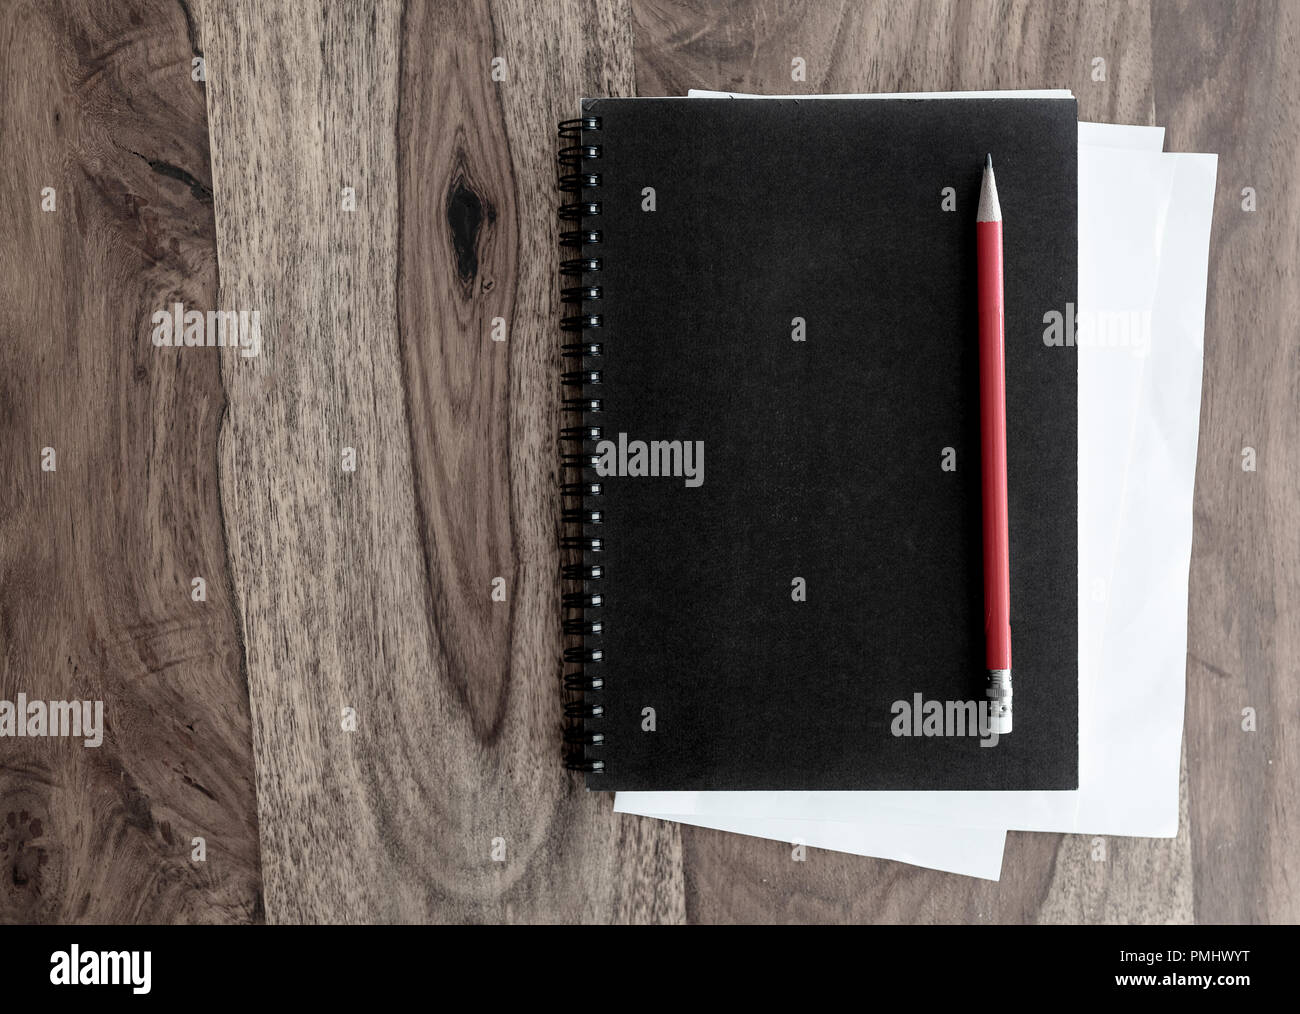 black spiral notebook and pen on wooden table Stock Photo